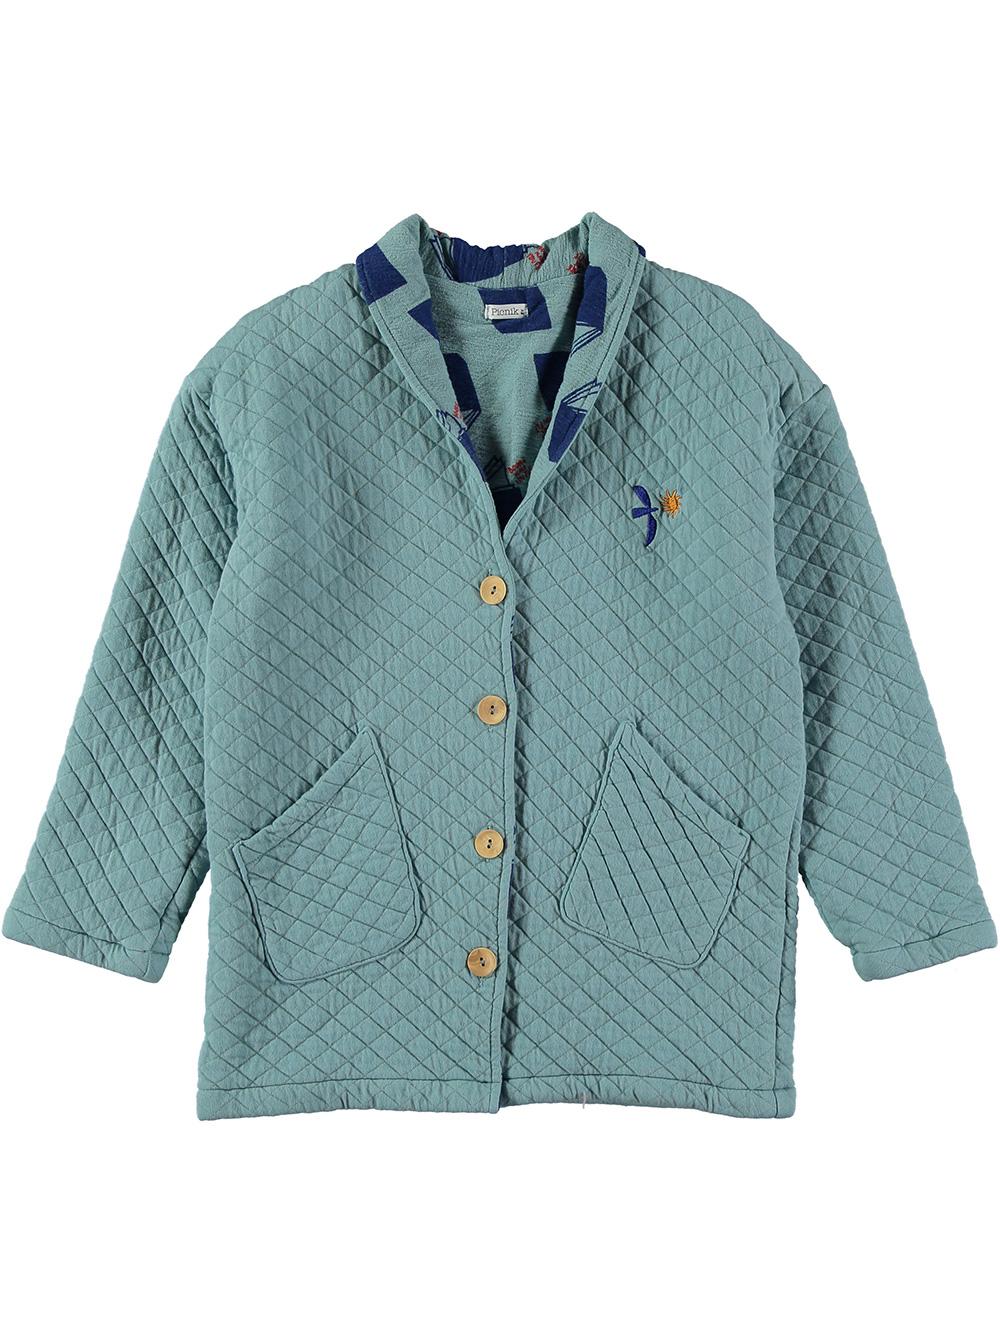 BLUE BIRD AND SUN QUILTED JACKET